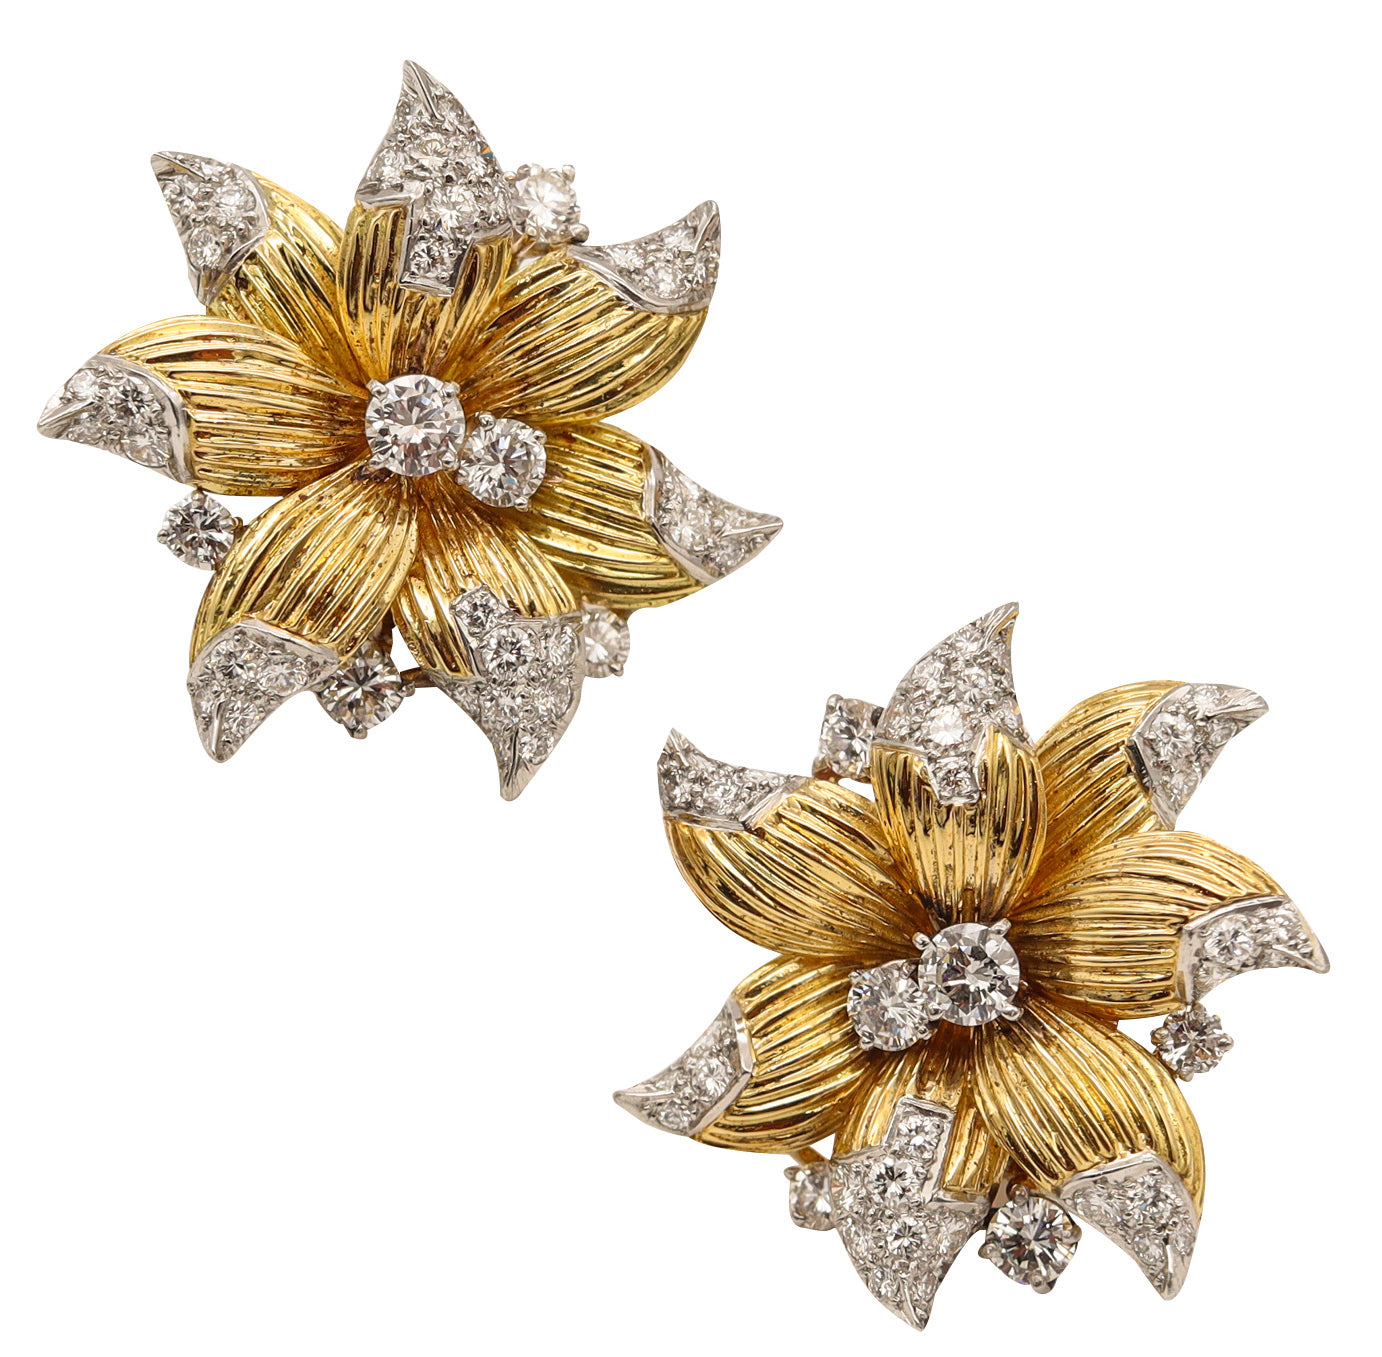 *French 1960 Mid-Century clip Earrings in 18 kt gold and platinum with 6.63 Cts in Diamonds